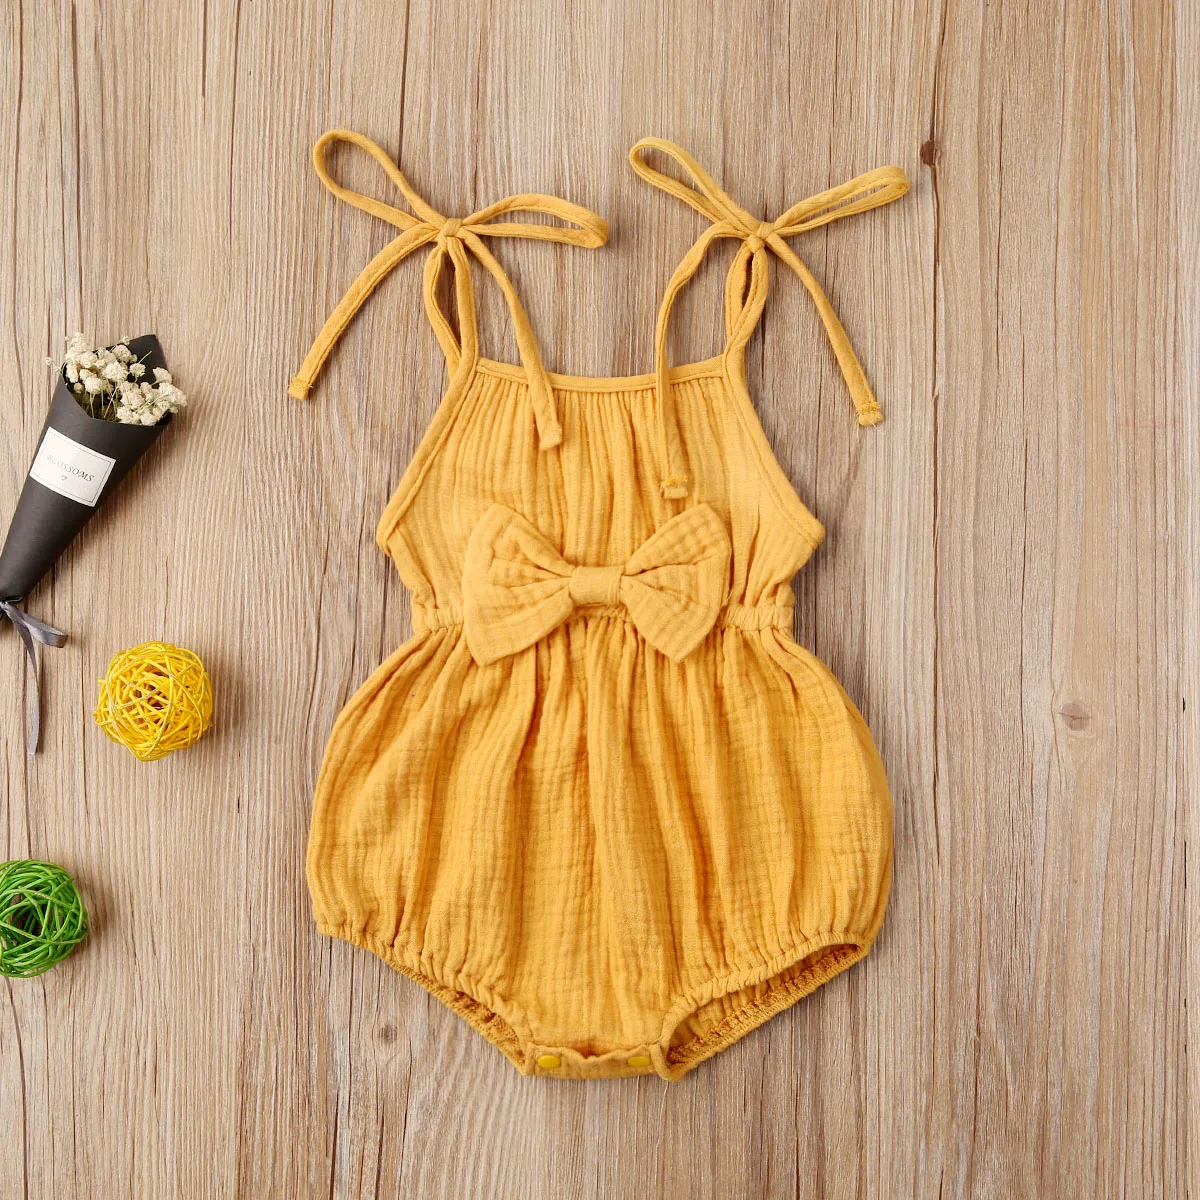 2020 Baby Summer Clothing  Newborn Baby Girl Cute Clothes Srap Romper Cotton Linen Solid Jumpsuit Bowknot Outfits Set Soft carters baby bodysuits	 Baby Rompers